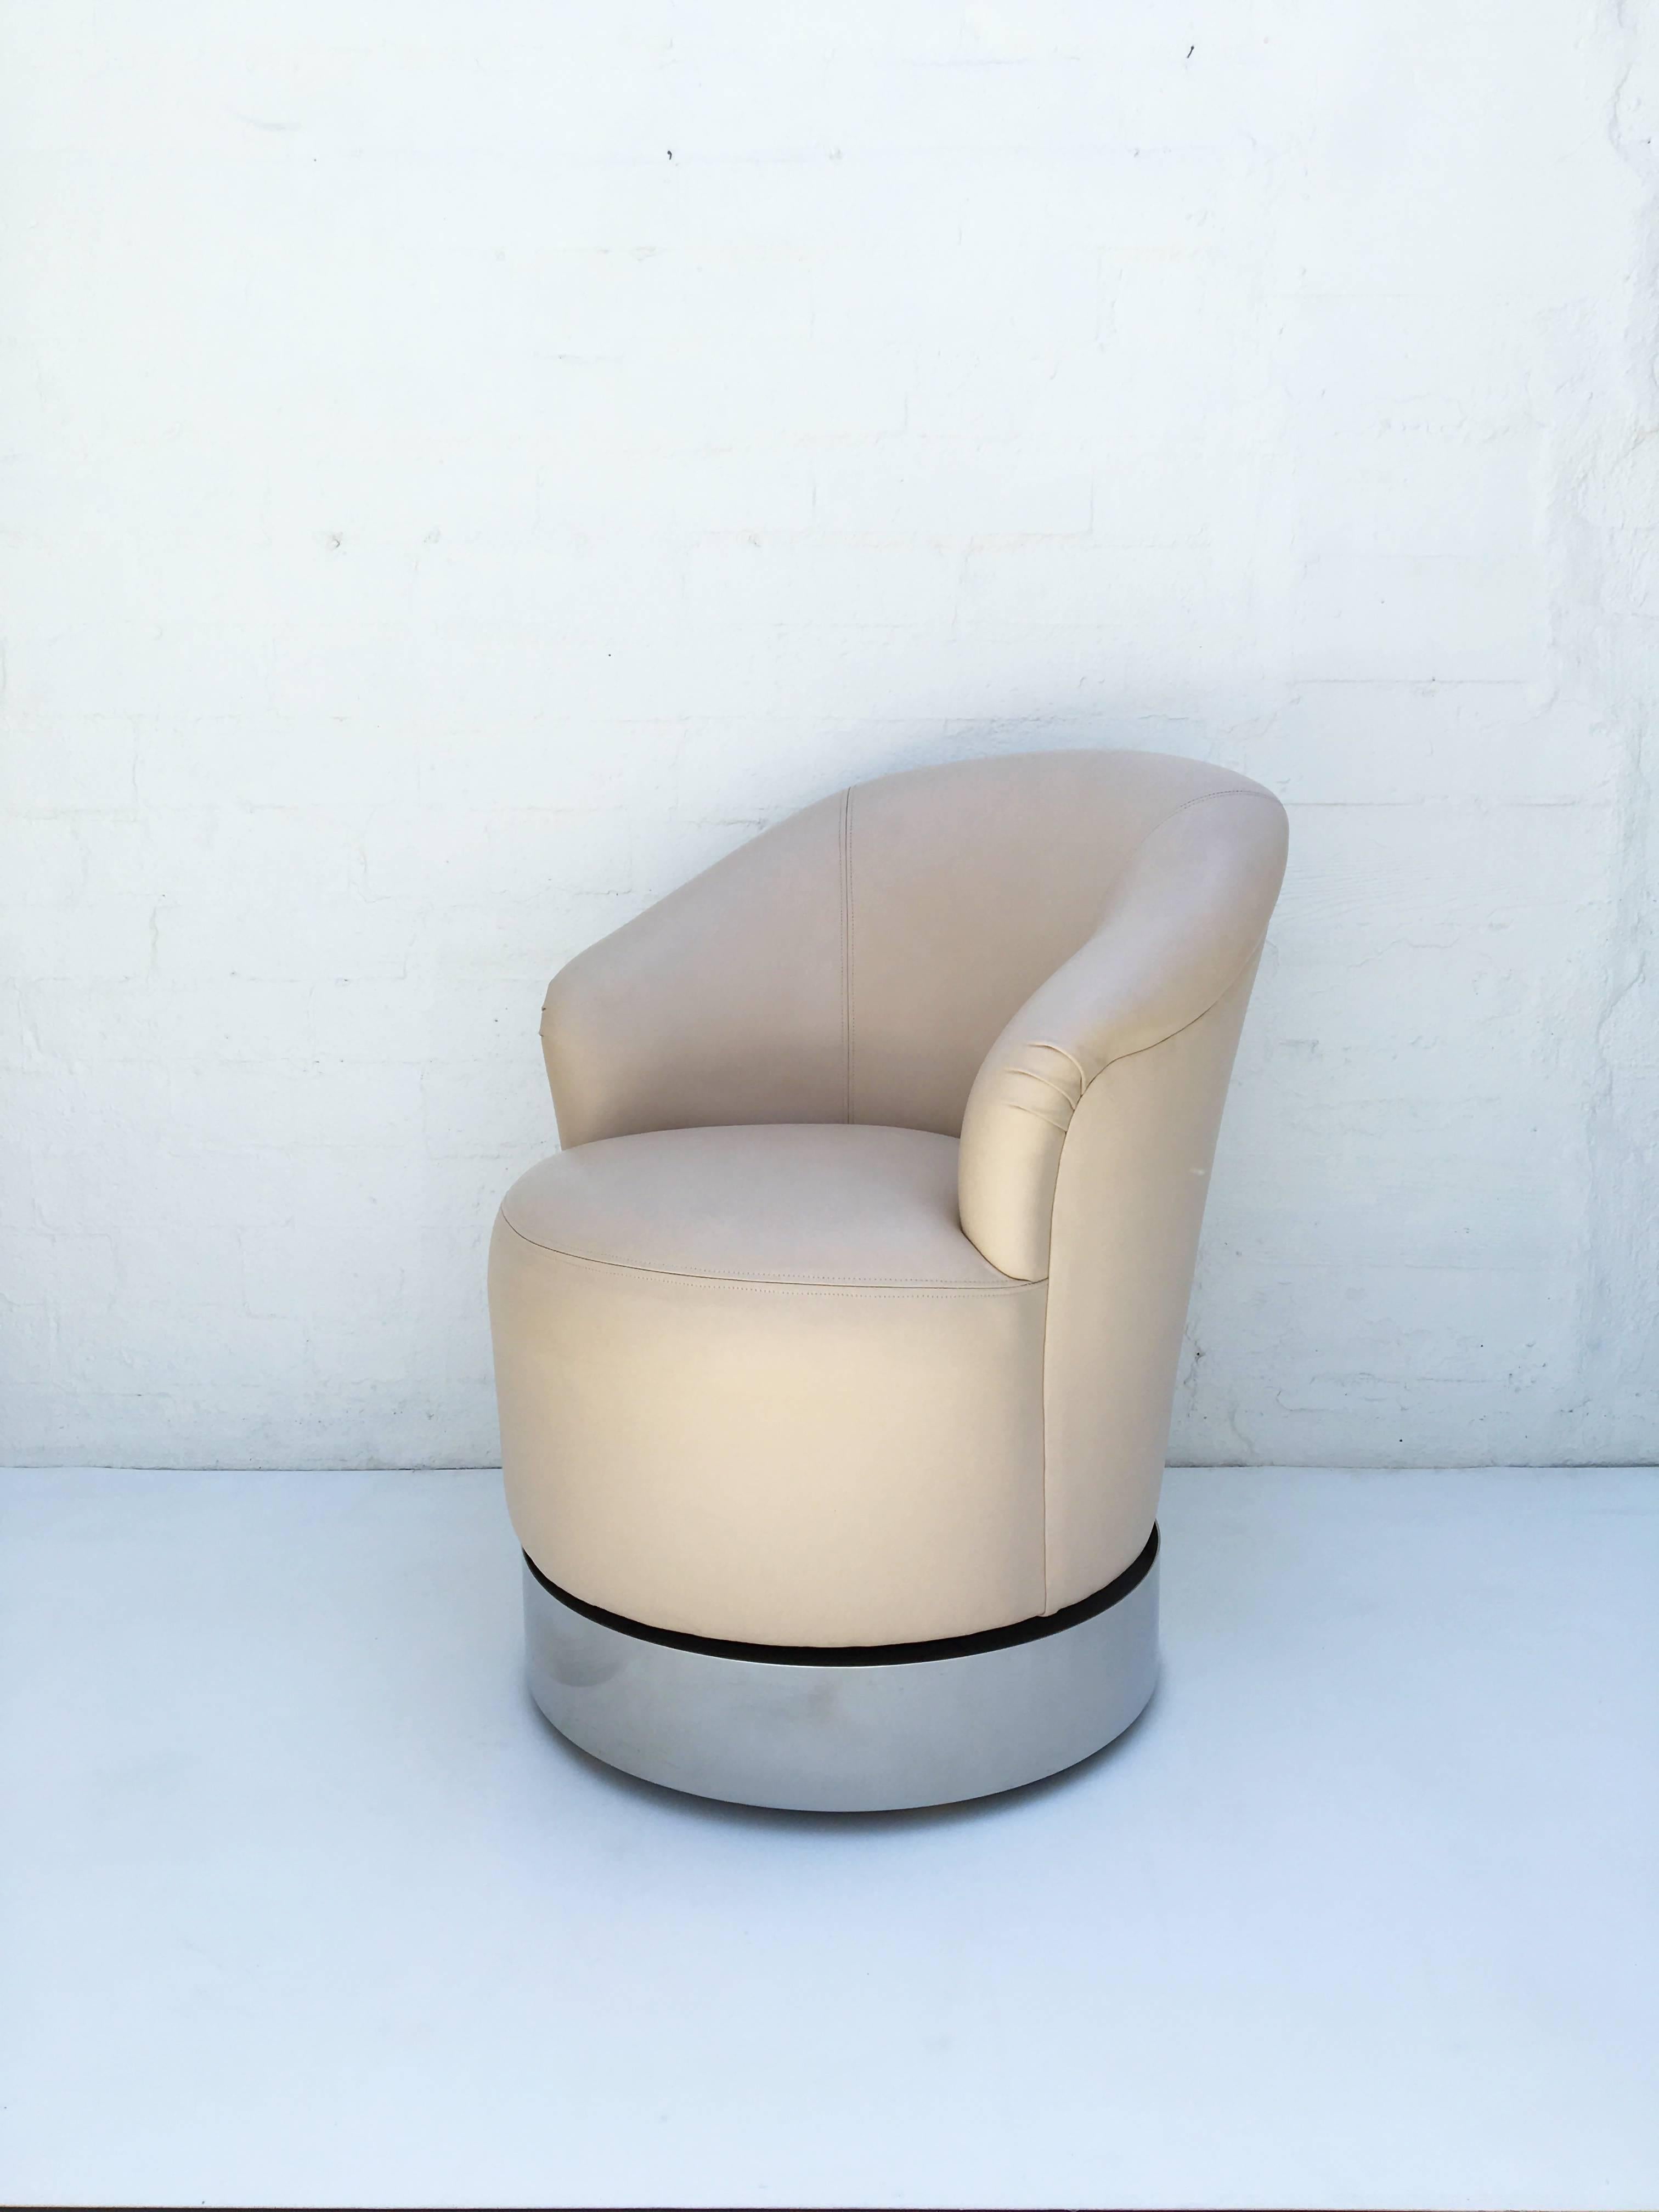 A set of four glamorous leather and chrome swivel chairs designed by Sally Sirkin Lewis for J. Robert Scott in the 1980s.
Perfect for a game table or just as lounge chairs.
They have casters for easy moving.